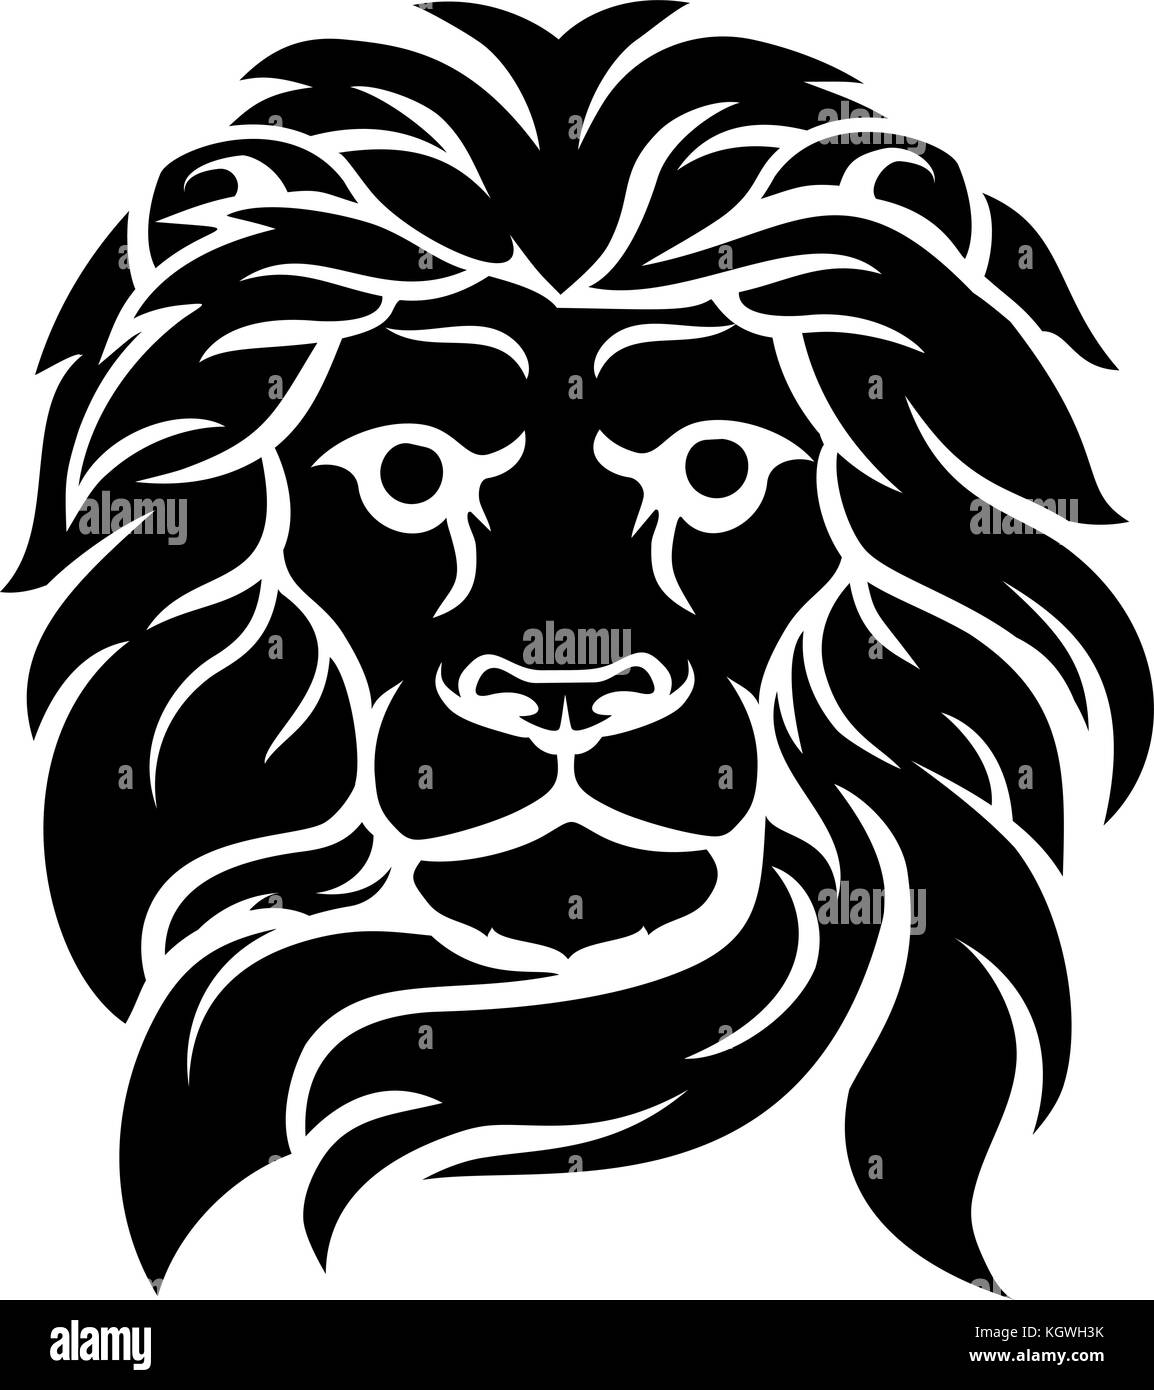 Lion face etching Stock Vector Images - Alamy